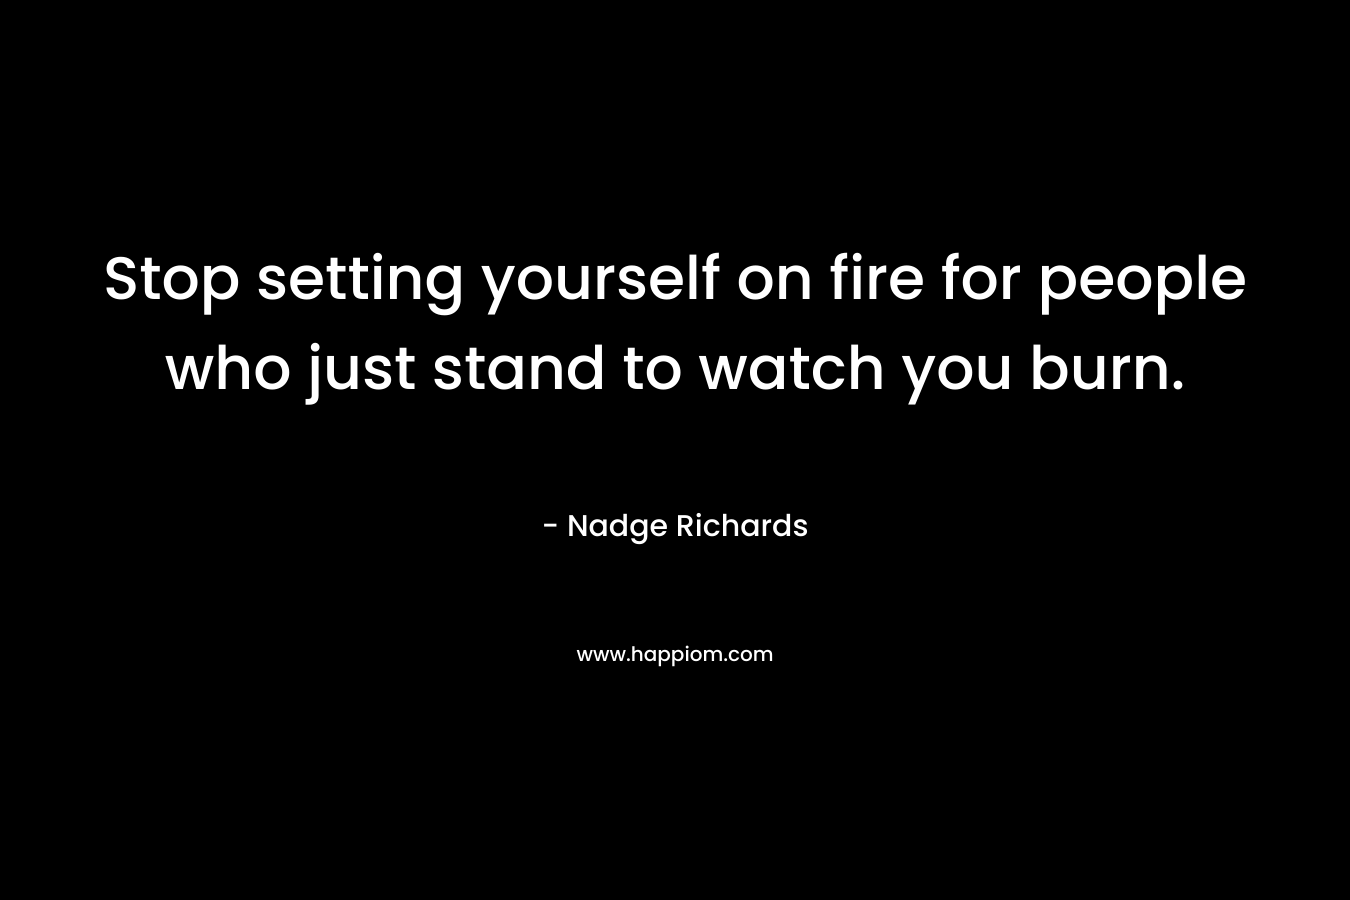 Stop setting yourself on fire for people who just stand to watch you burn. – Nadge Richards